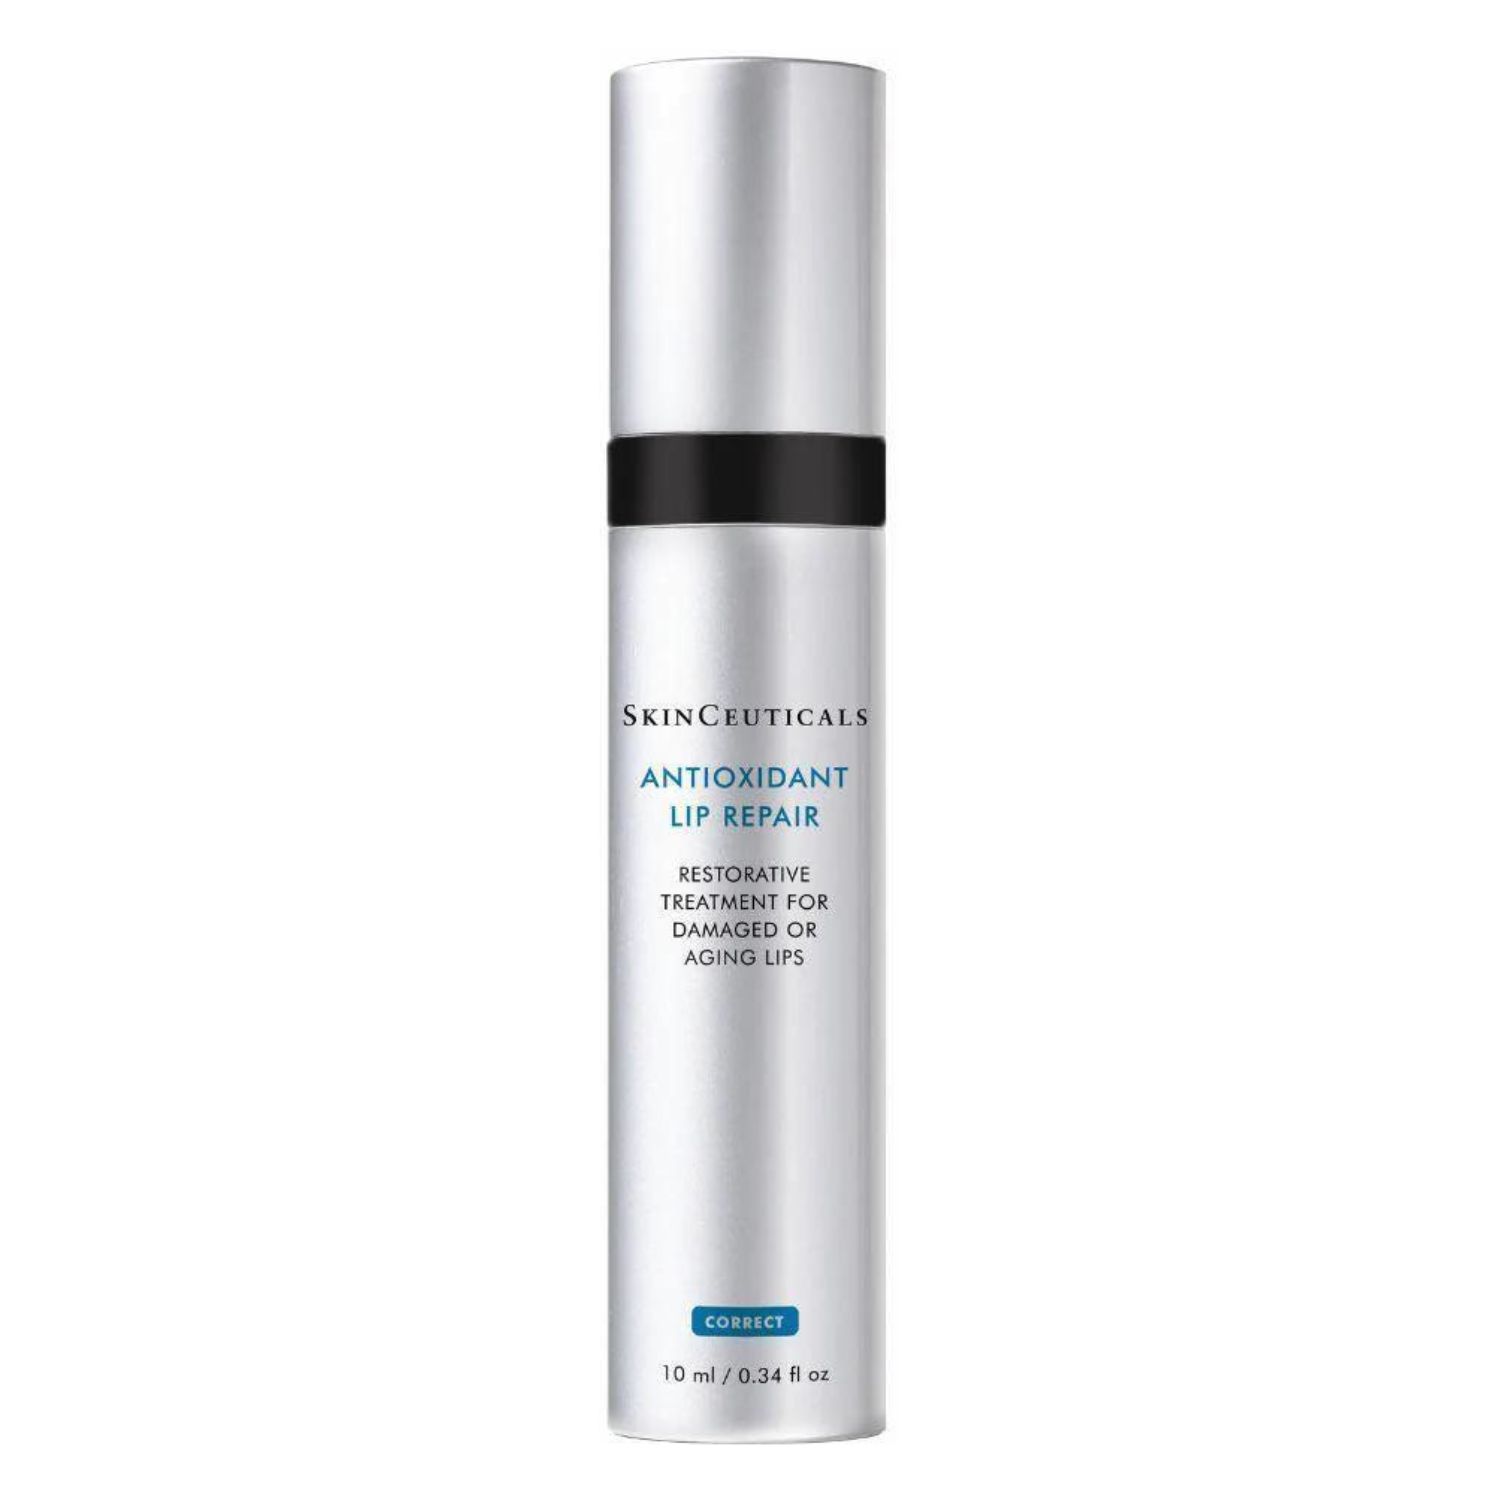 SkinCeuticals Antioxidant Lip Repair for Damaged or Aging Lips 0.34 oz - image 2 of 5